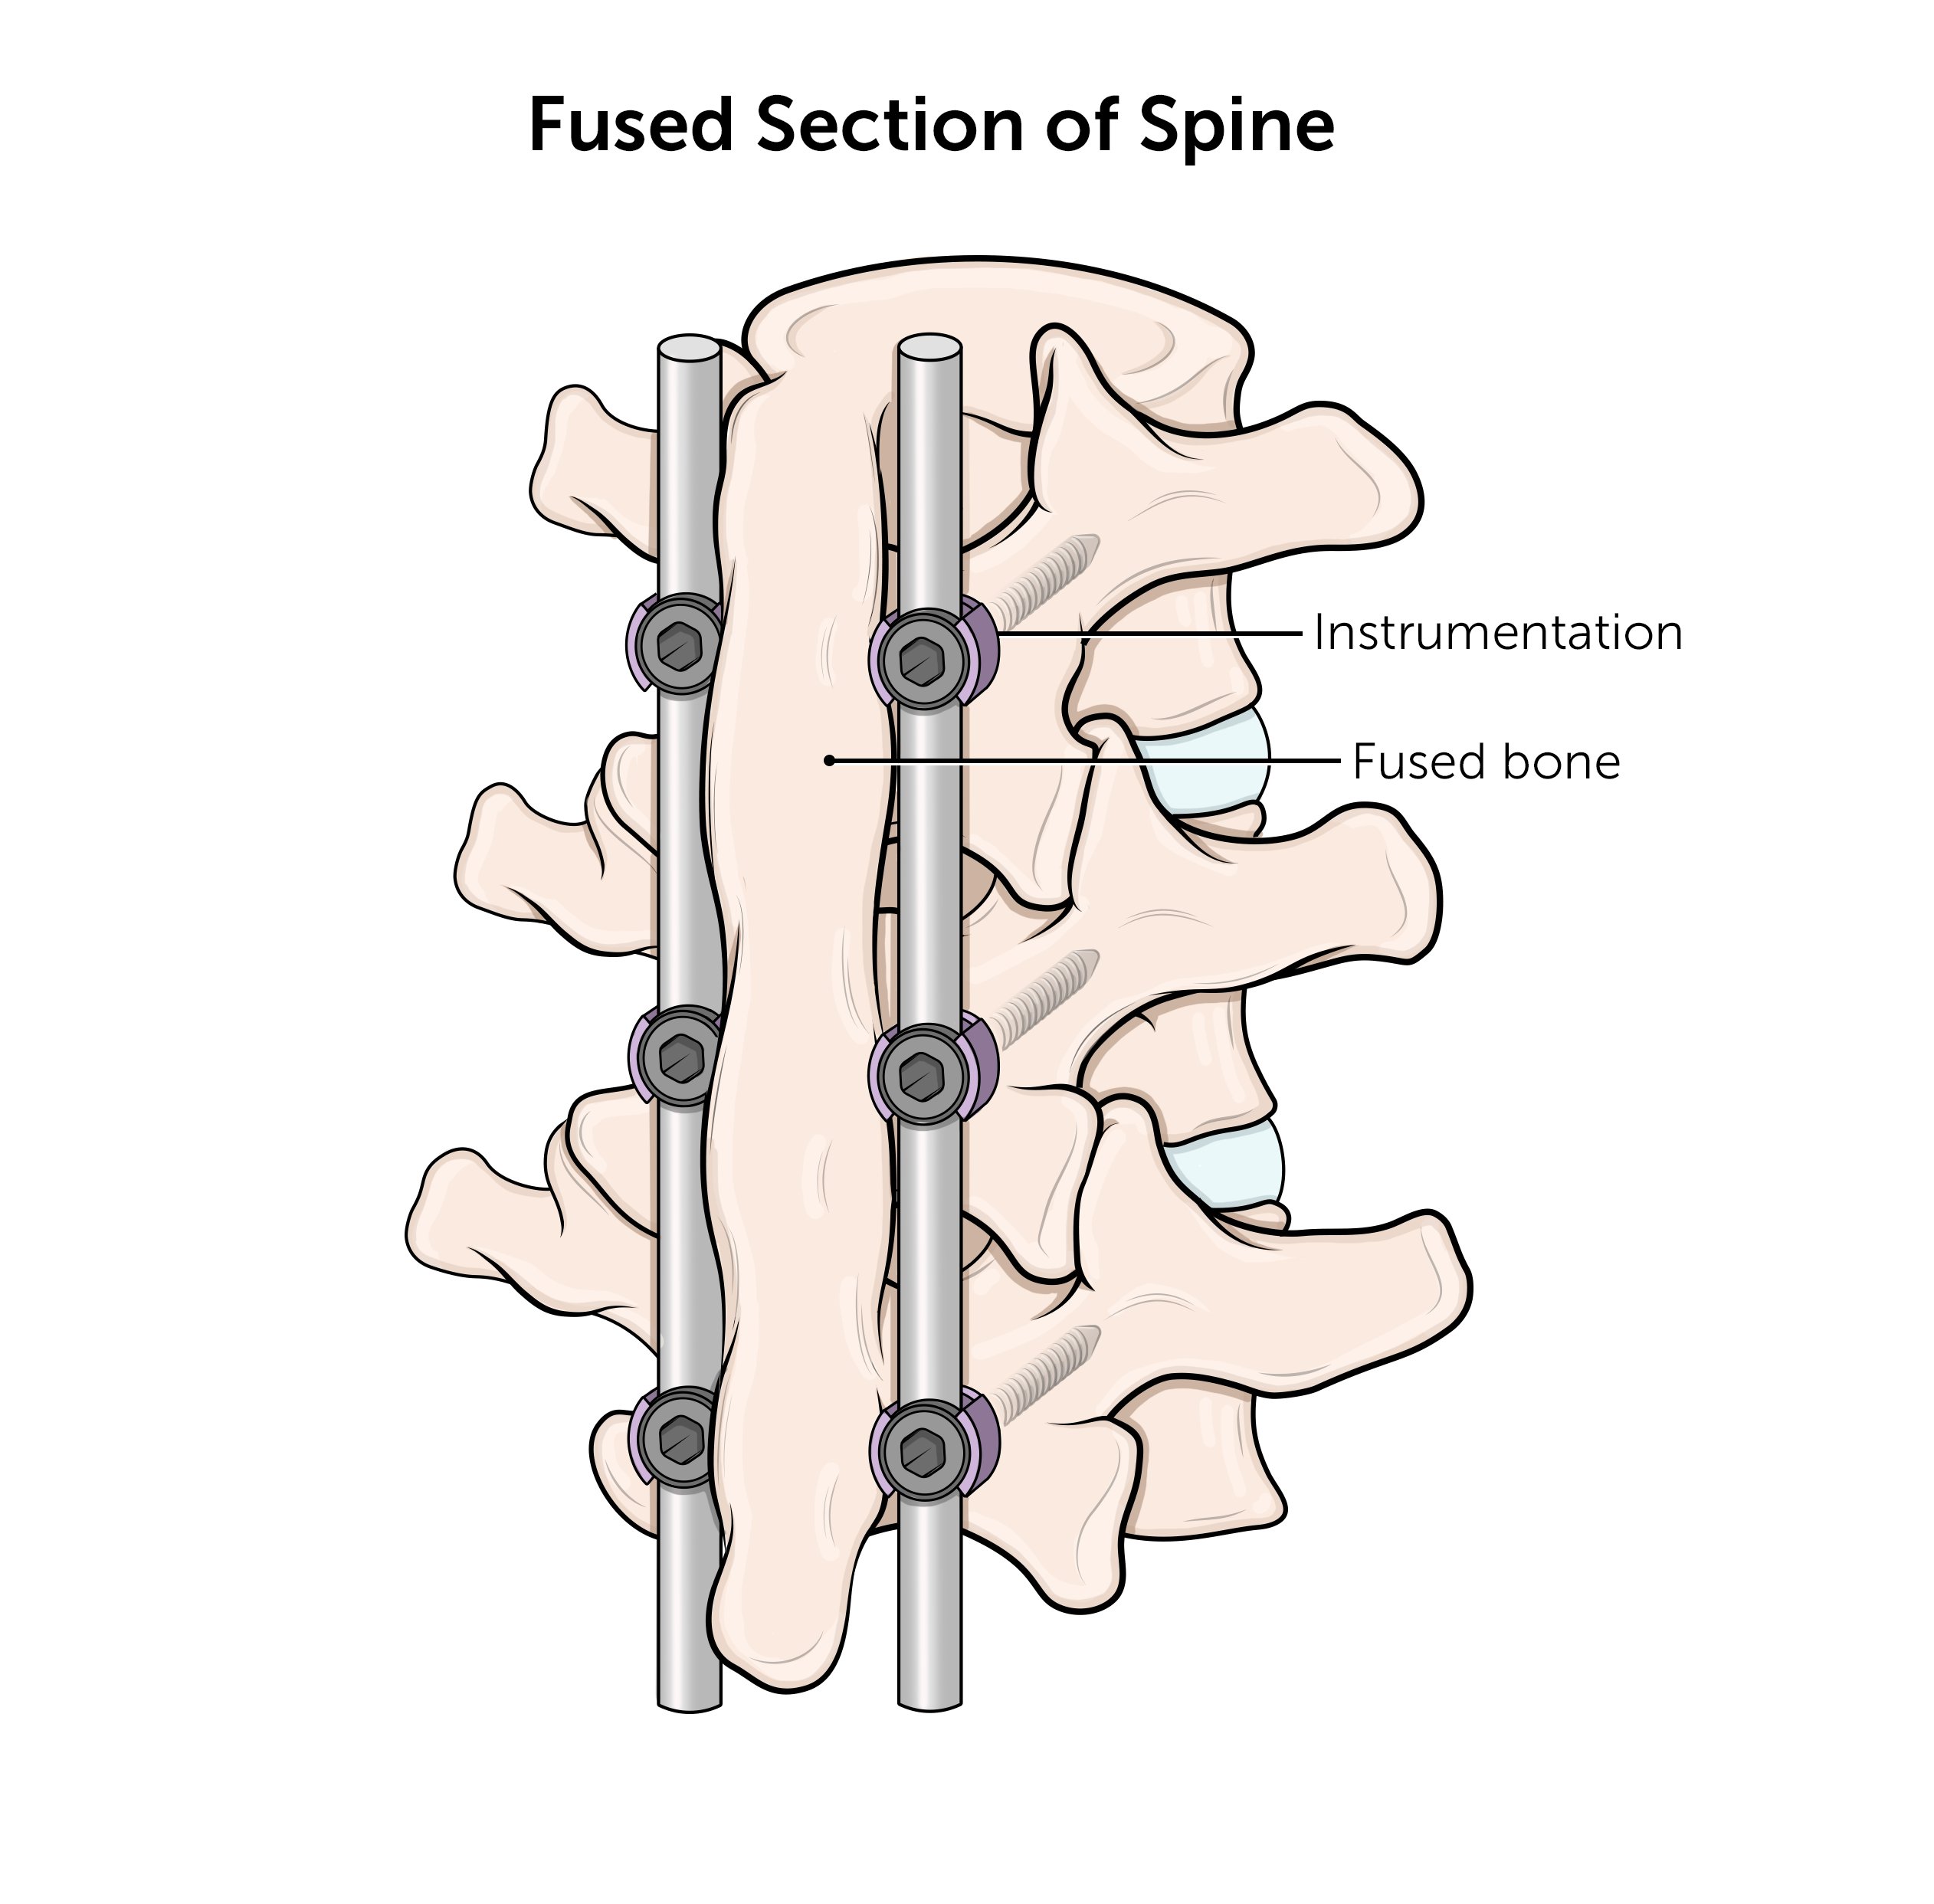 Fused bone after spinal fusion surgery. 